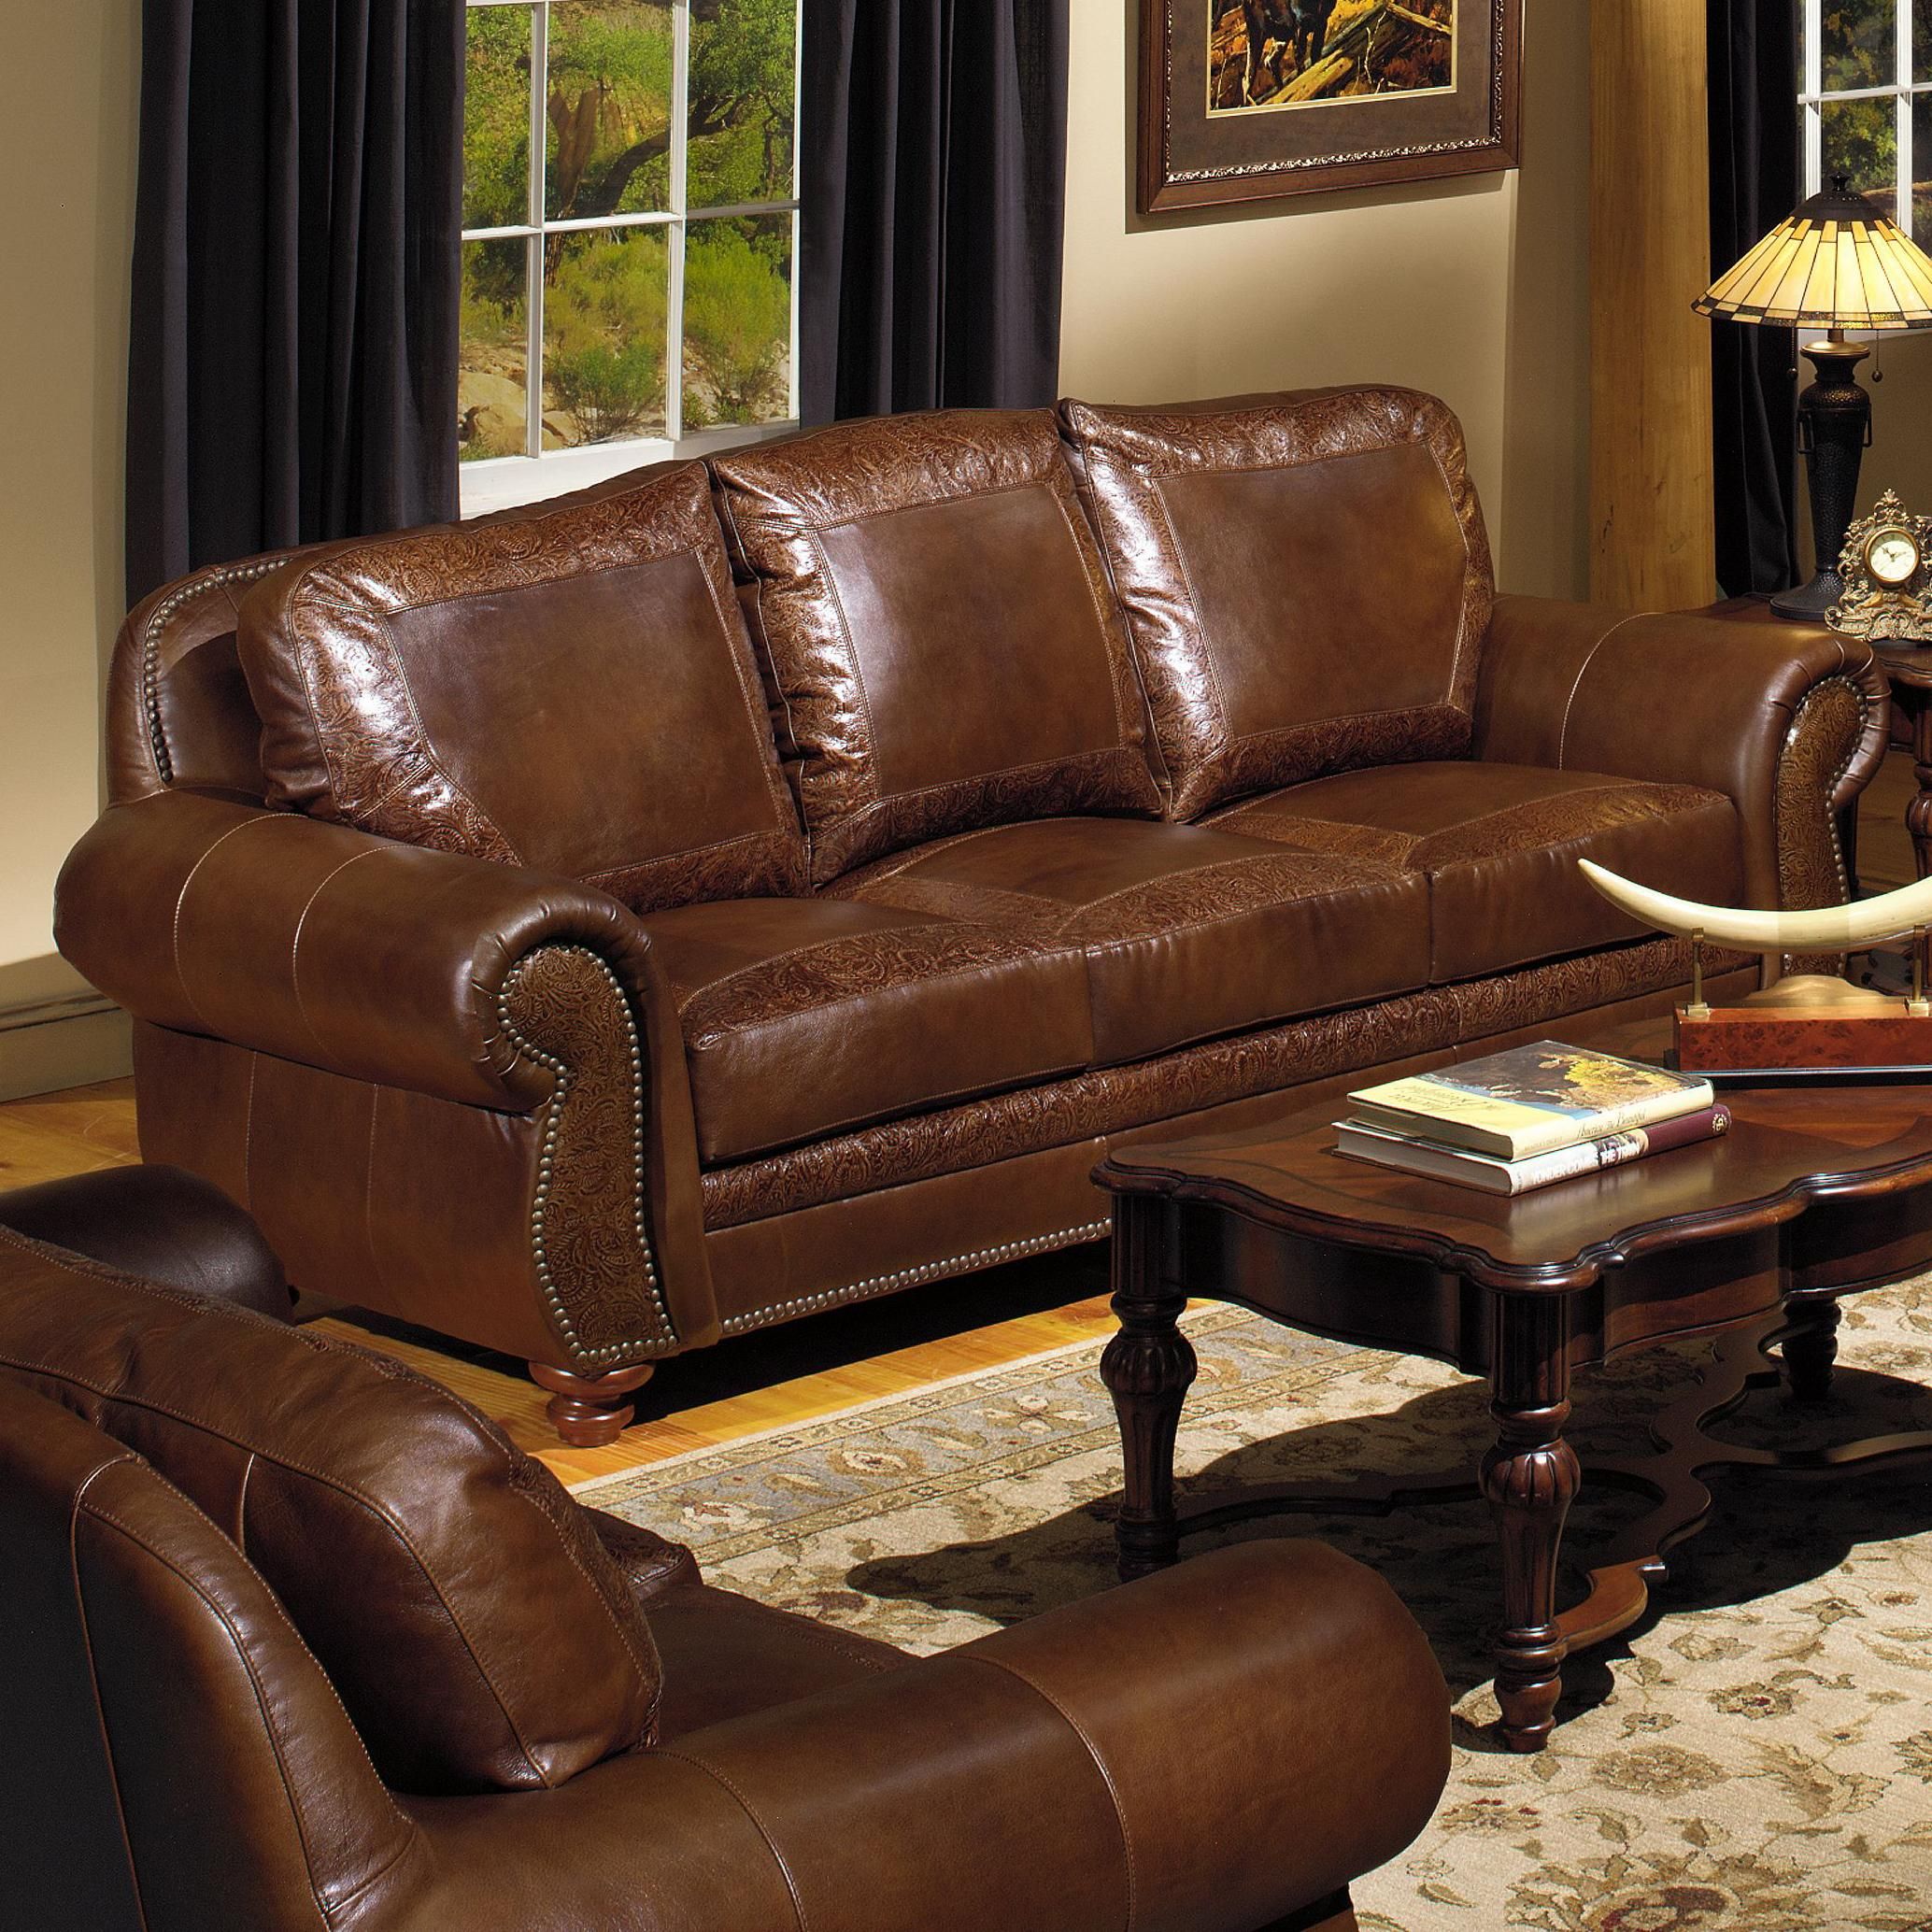 Brown Top Grain Leather Sofa In Sofas With Ottomans In Brown (Gallery 7 of 20)